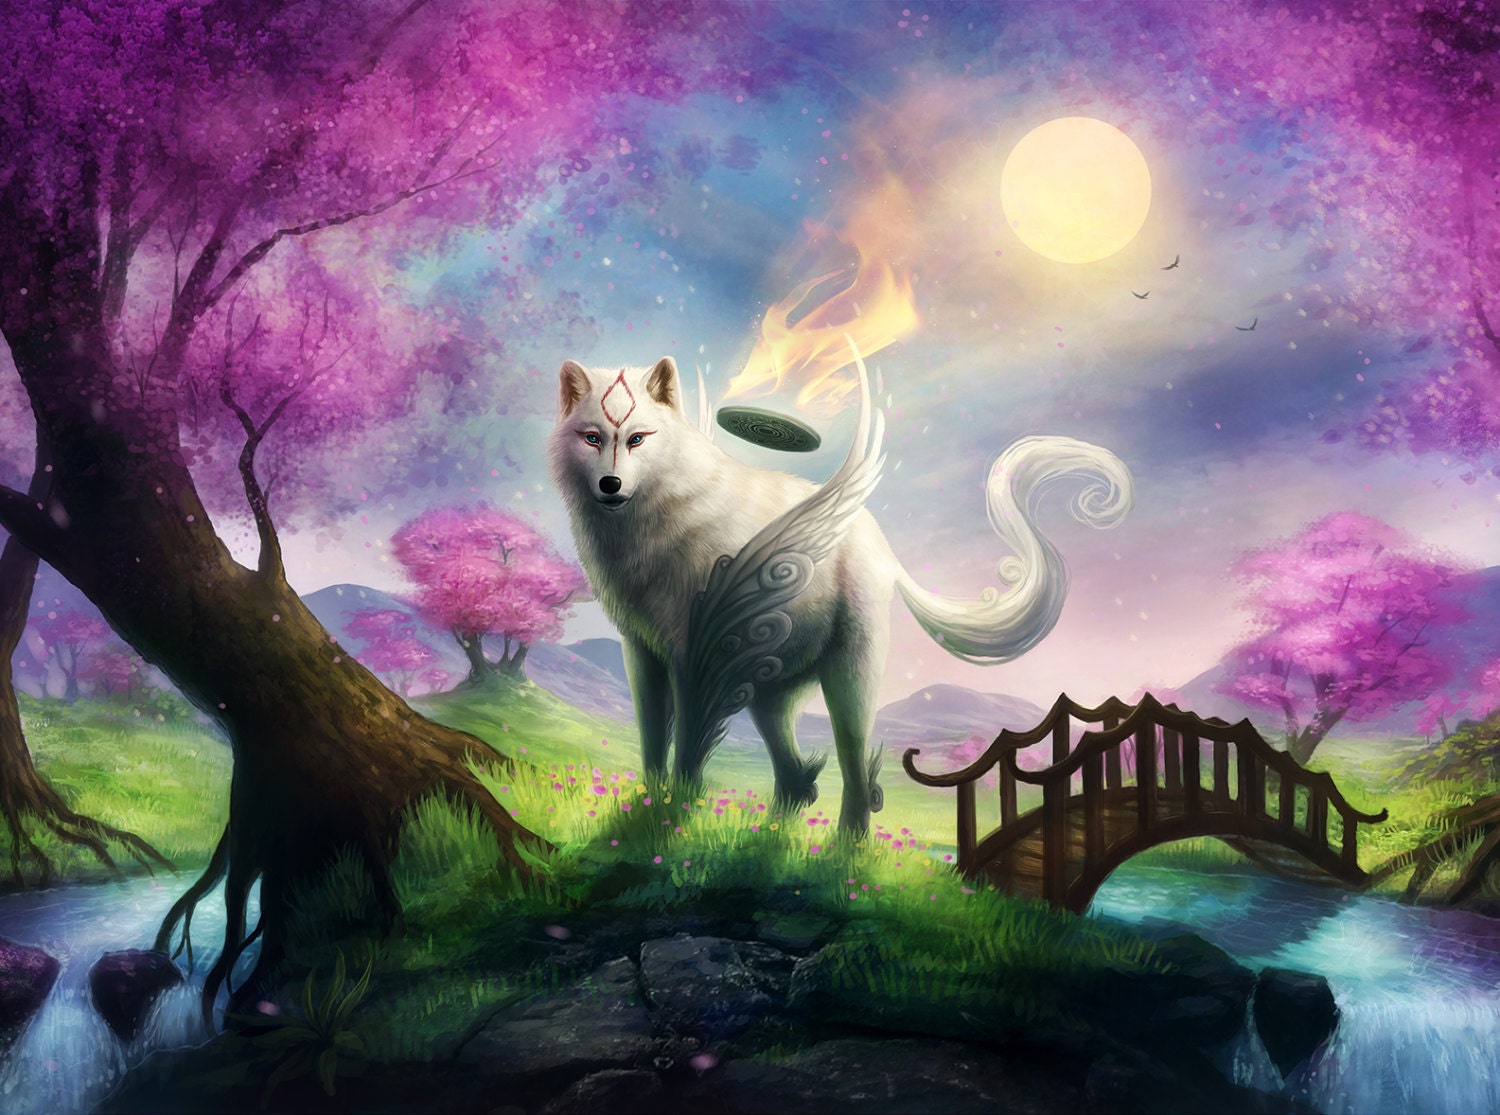 Okami Signed Art Print Fantasy Wolf Poster Painting by